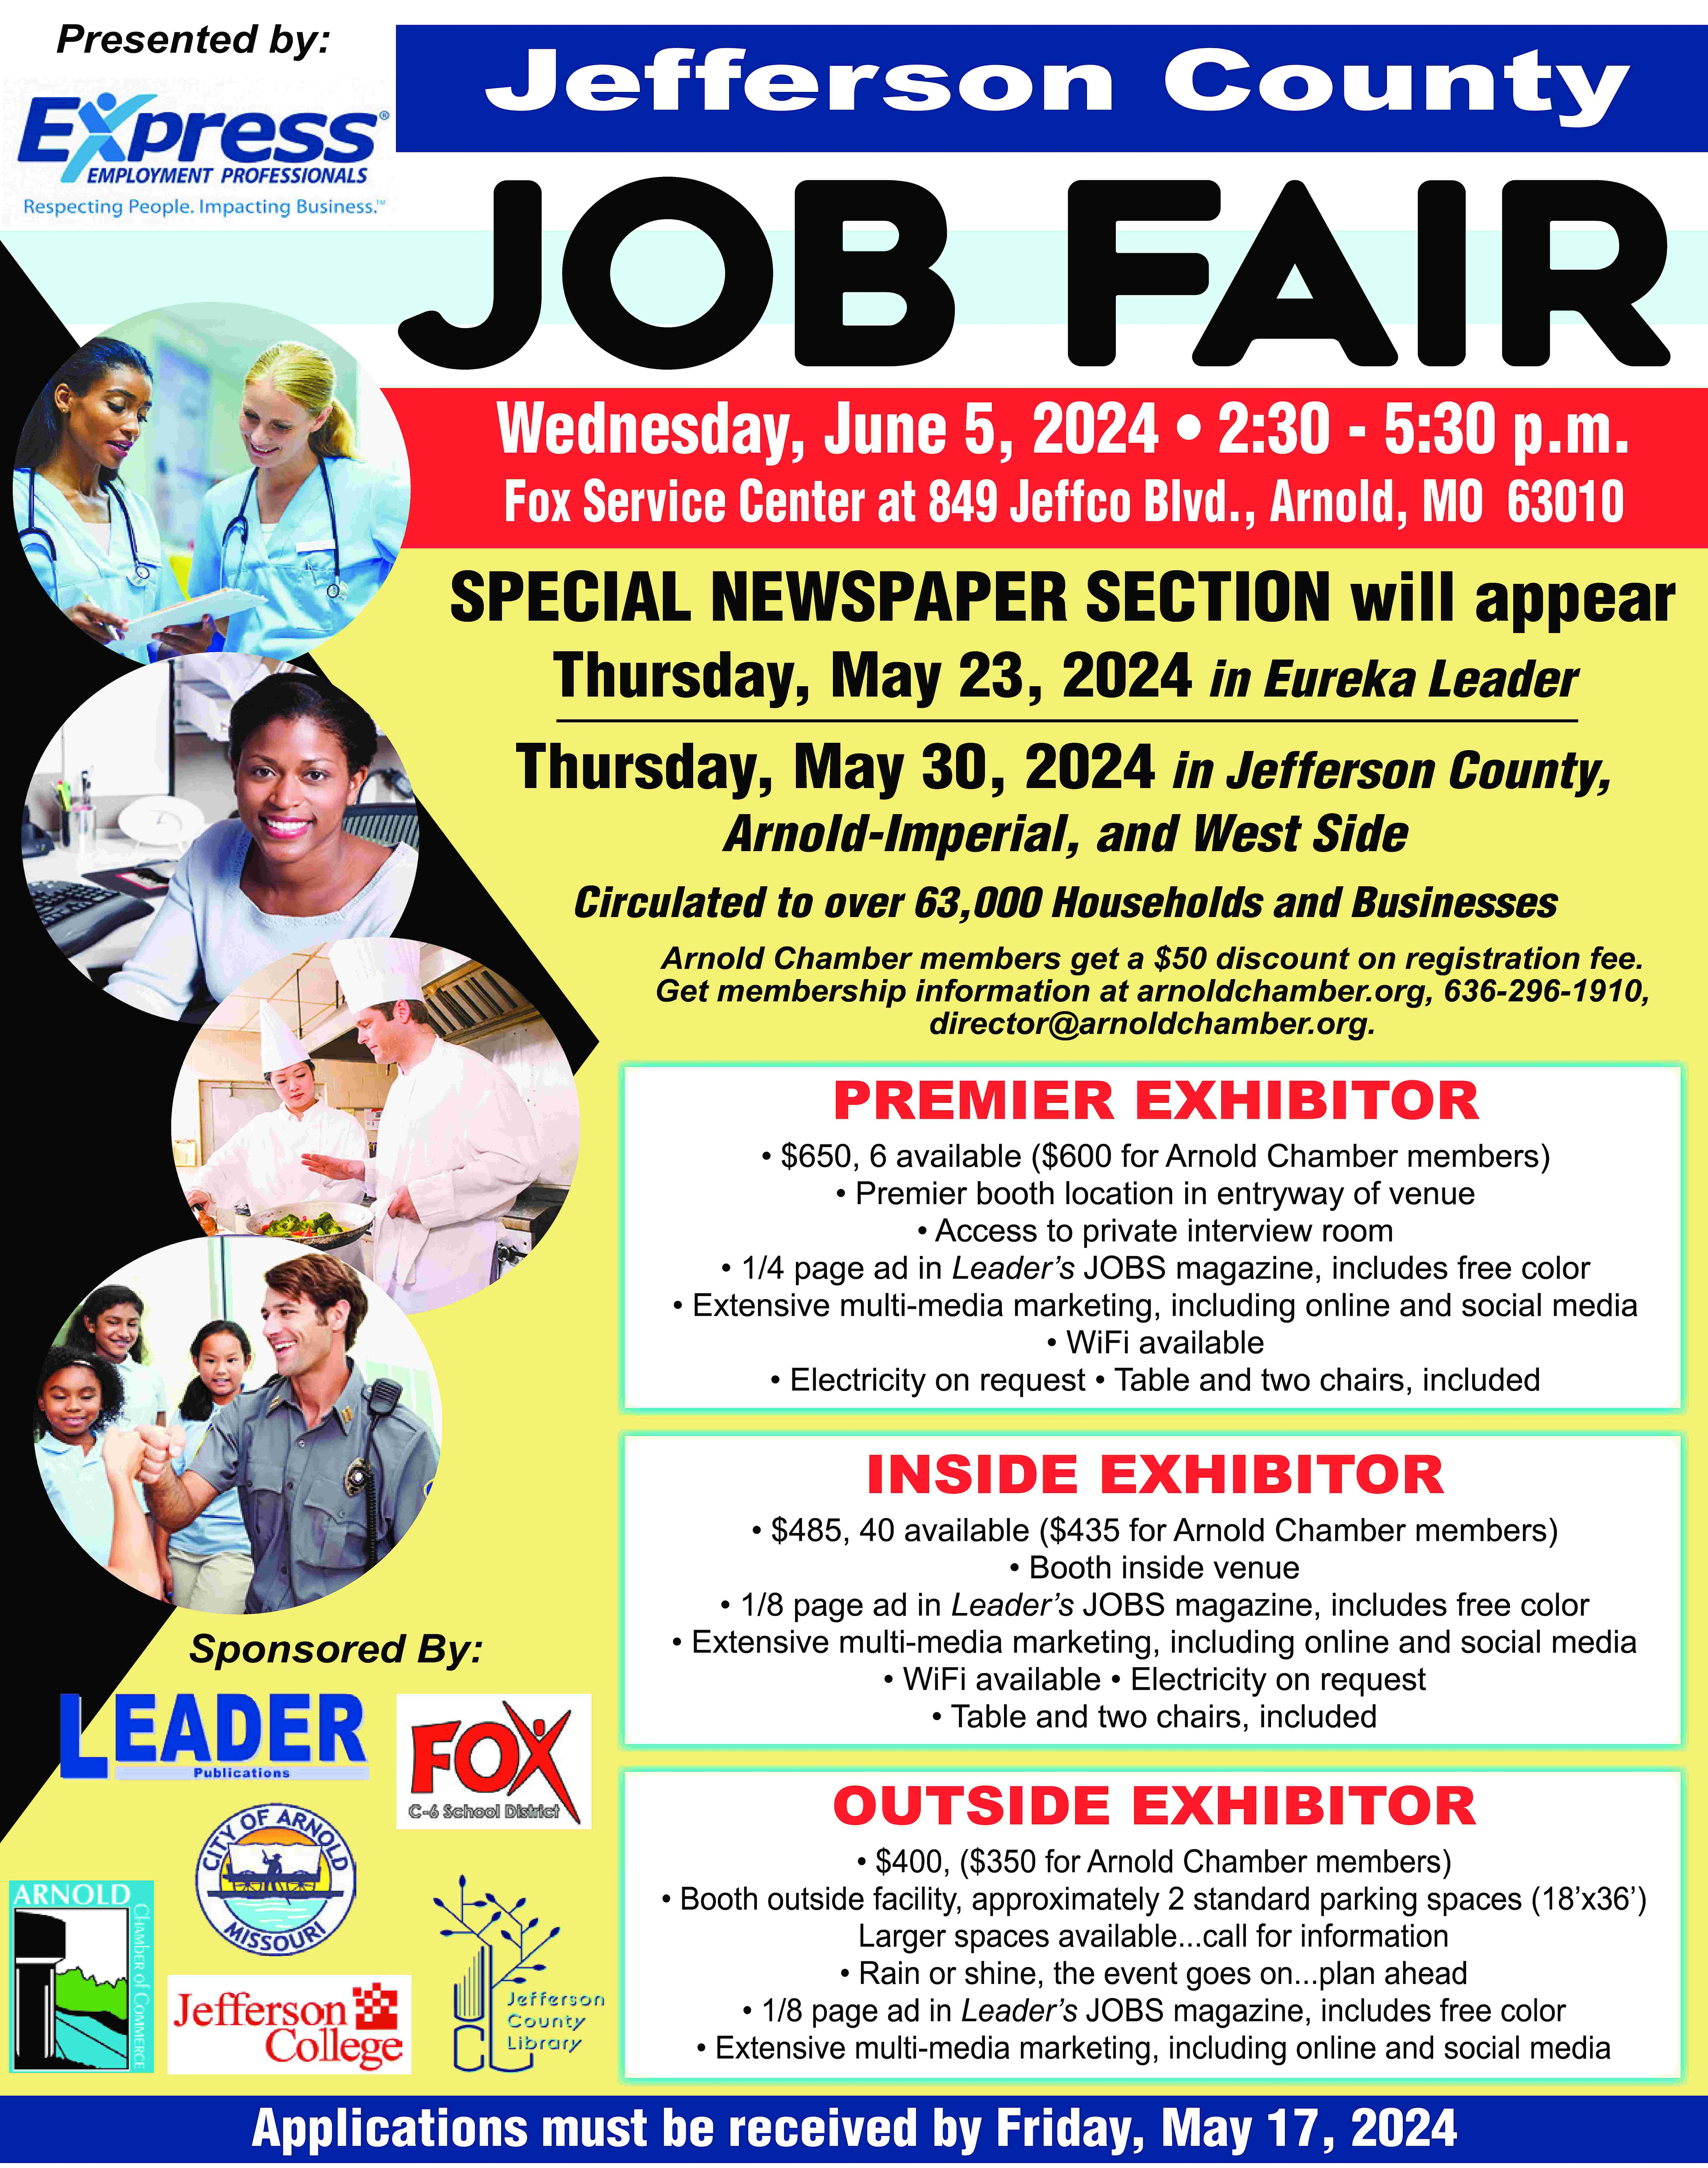 Presented by: Jefferson County Job  Presented by: Jefferson County Job Fair Wednesday, June 5, 2024 • 2:30 - 5:30 p.m. Fox Service Center at 849 Jeffco Blvd., Arnold, MO 63010 SPECIAL NEWSPAPER SECTION will appear Thursday, May 23, 2024 in Eureka Leader Thursday, May 30, 2024 in Jefferson County, Arnold-Imperial, and West Side Circulated to over 63,000 Households and Businesses Arnold Chamber members get a $50 discount on registration fee. Get membership information at arnoldchamber.org, 636-296-1910, director@arnoldchamber.org. PREMIER EXHIBITOR • $650, 6 available ($600 for Arnold Chamber members) • Premier booth location in entryway of venue • Access to private interview room • 1/4 page ad in Leader’s JOBS magazine, includes free color • Extensive multi-media marketing, including online and social media • WiFi available • Electricity on request • Table and two chairs, included INSIDE EXHIBITOR Sponsored By: • $485, 40 available ($435 for Arnold Chamber members) • Booth inside venue • 1/8 page ad in Leader’s JOBS magazine, includes free color • Extensive multi-media marketing, including online and social media • WiFi available • Electricity on request • Table and two chairs, included OUTSIDE EXHIBITOR • $400, ($350 for Arnold Chamber members) • Booth outside facility, approximately 2 standard parking spaces (18’x36’) Larger spaces available...call for information • Rain or shine, the event goes on...plan ahead • 1/8 page ad in Leader’s JOBS magazine, includes free color • Extensive multi-media marketing, including online and social media Applications must be received by Friday, May 17, 2024